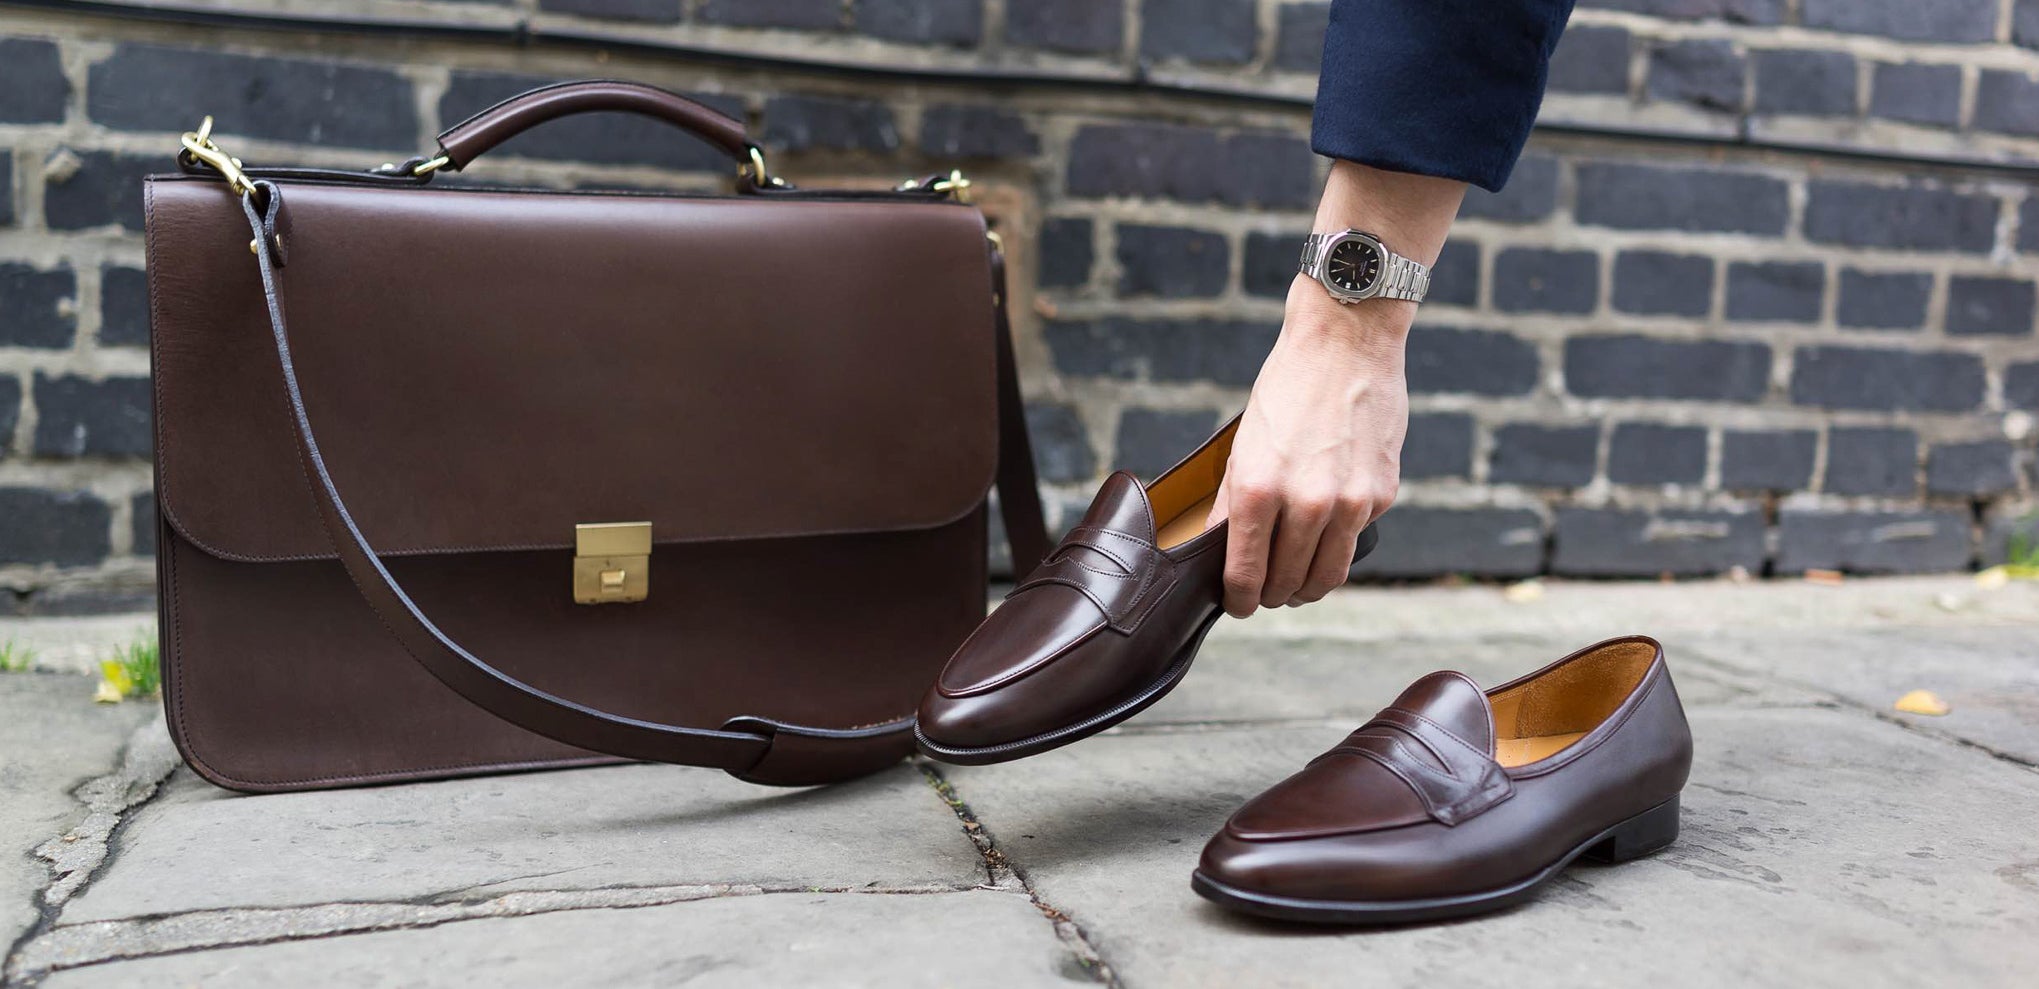 Meet the Emerging English Shoe Brand Making Insanely Comfortable Belgian Loafers